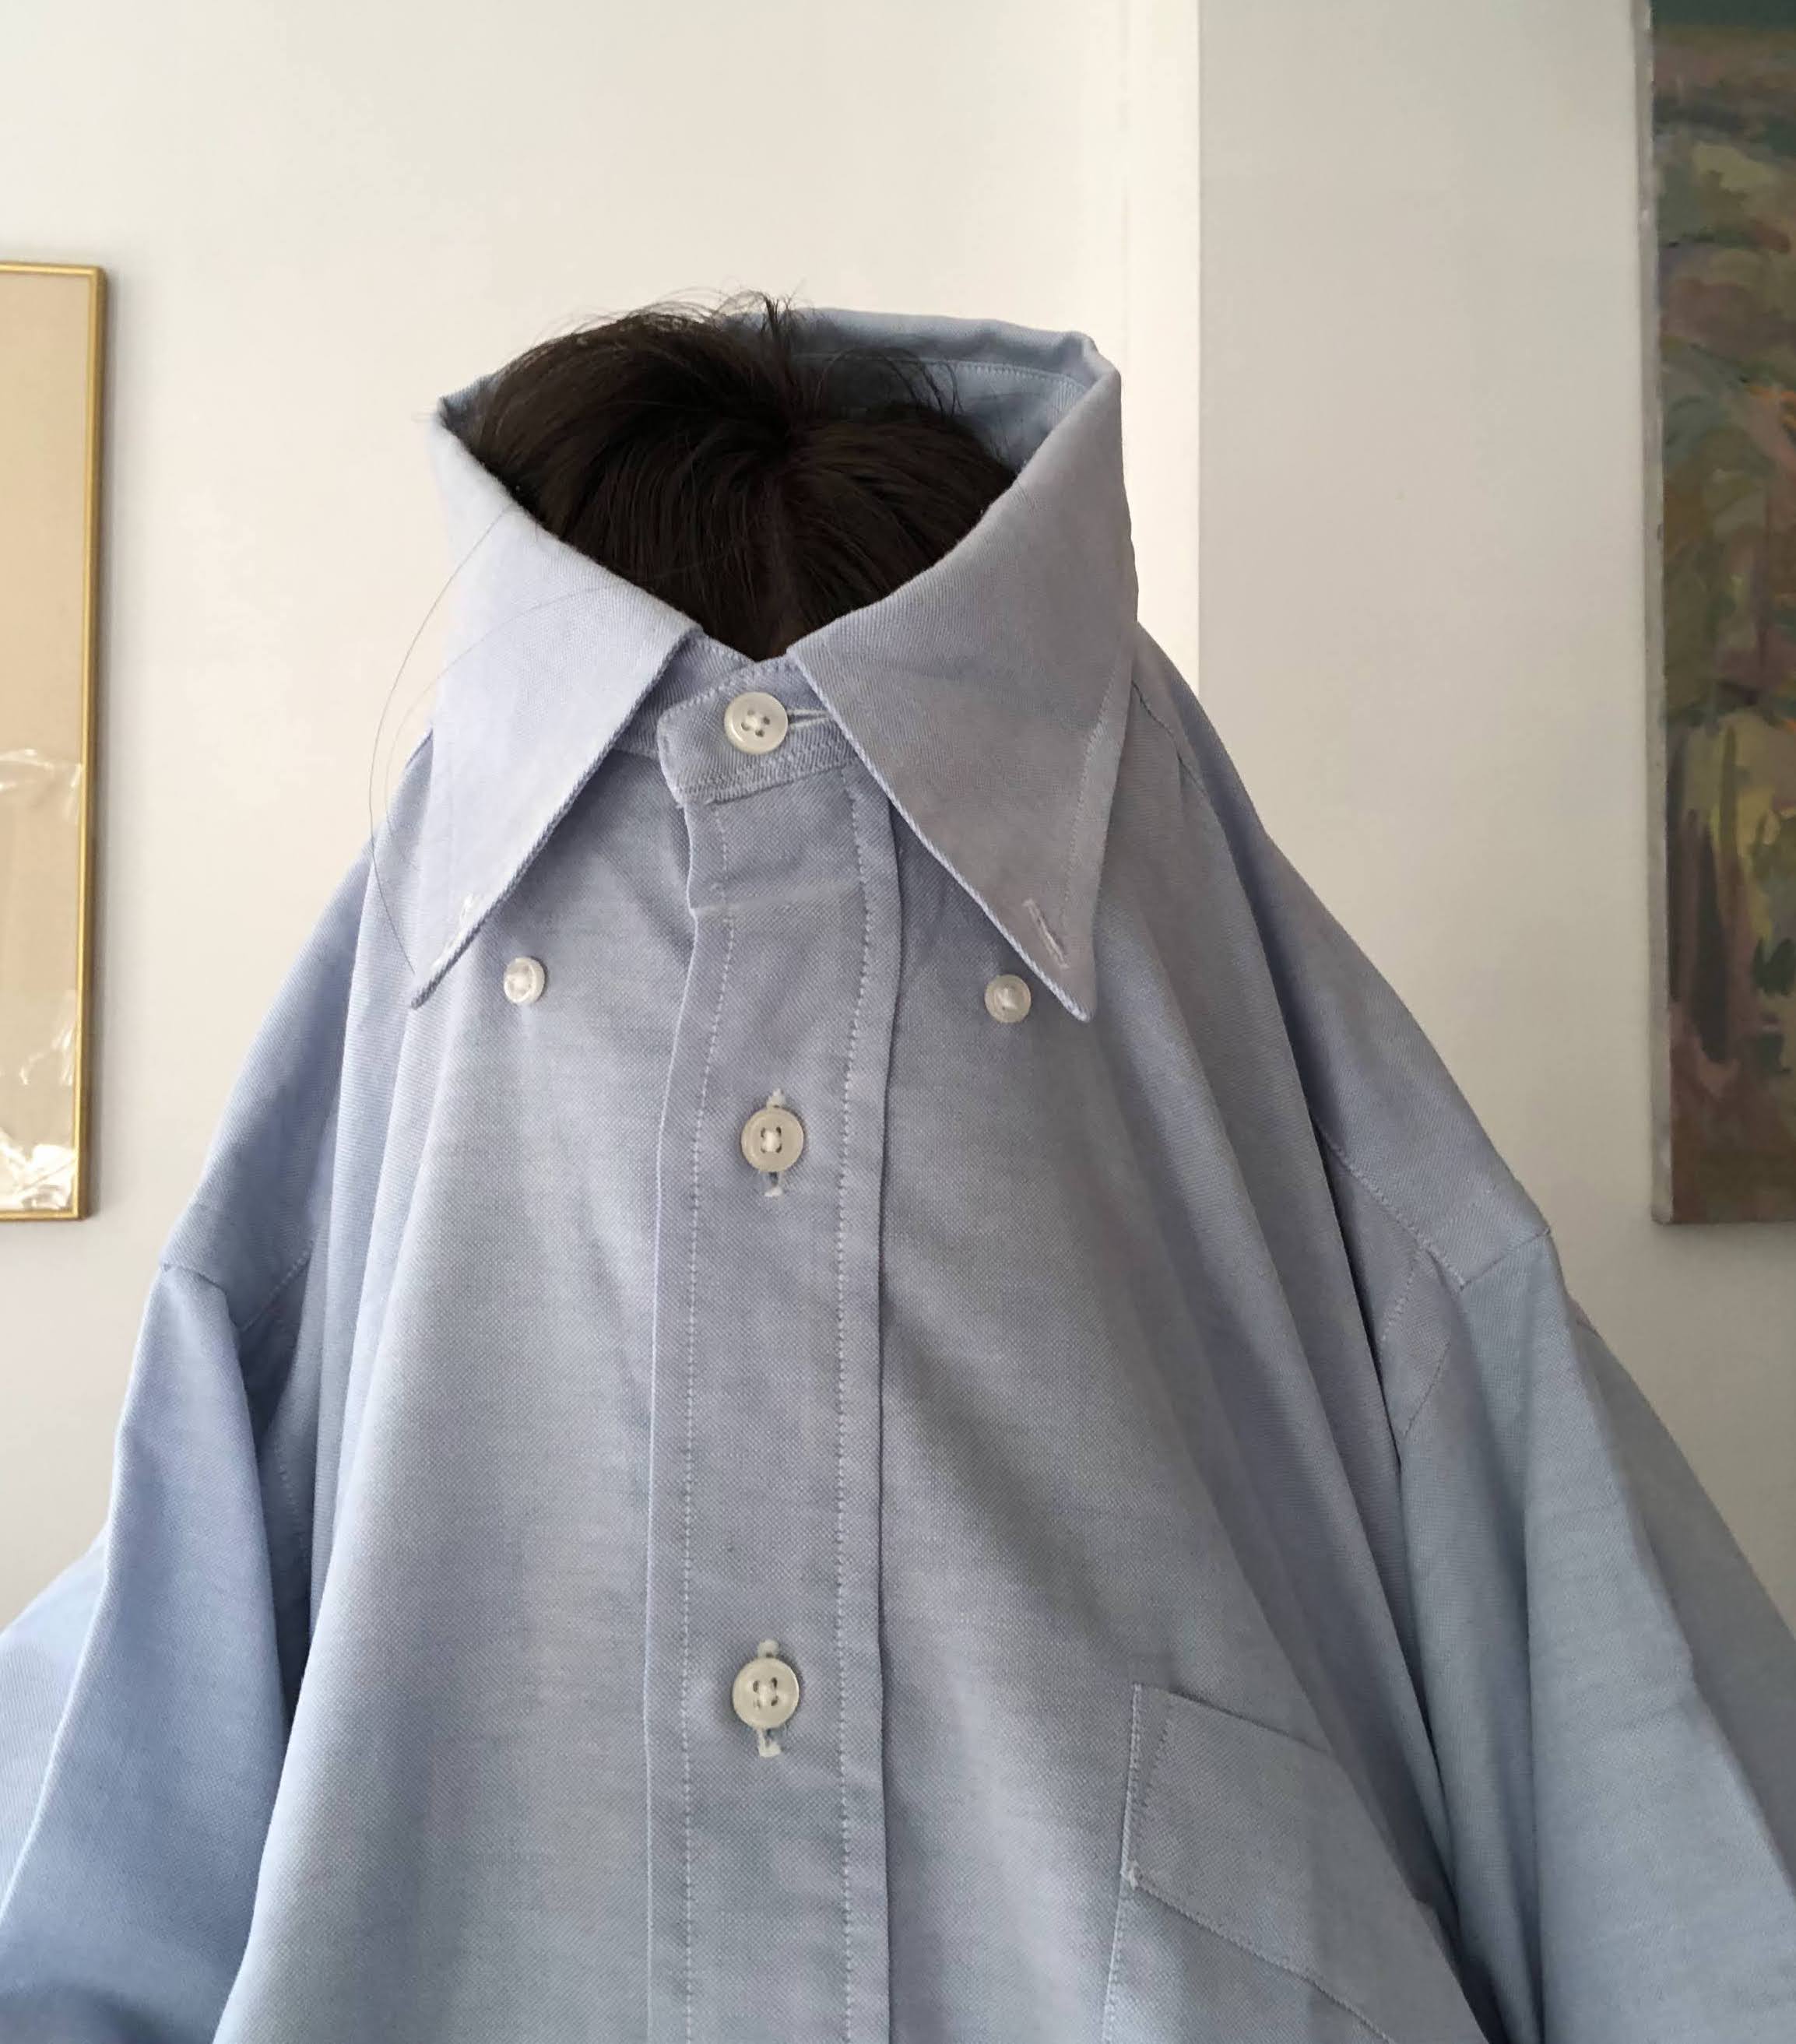 person wearing a blue button up shirt over their face